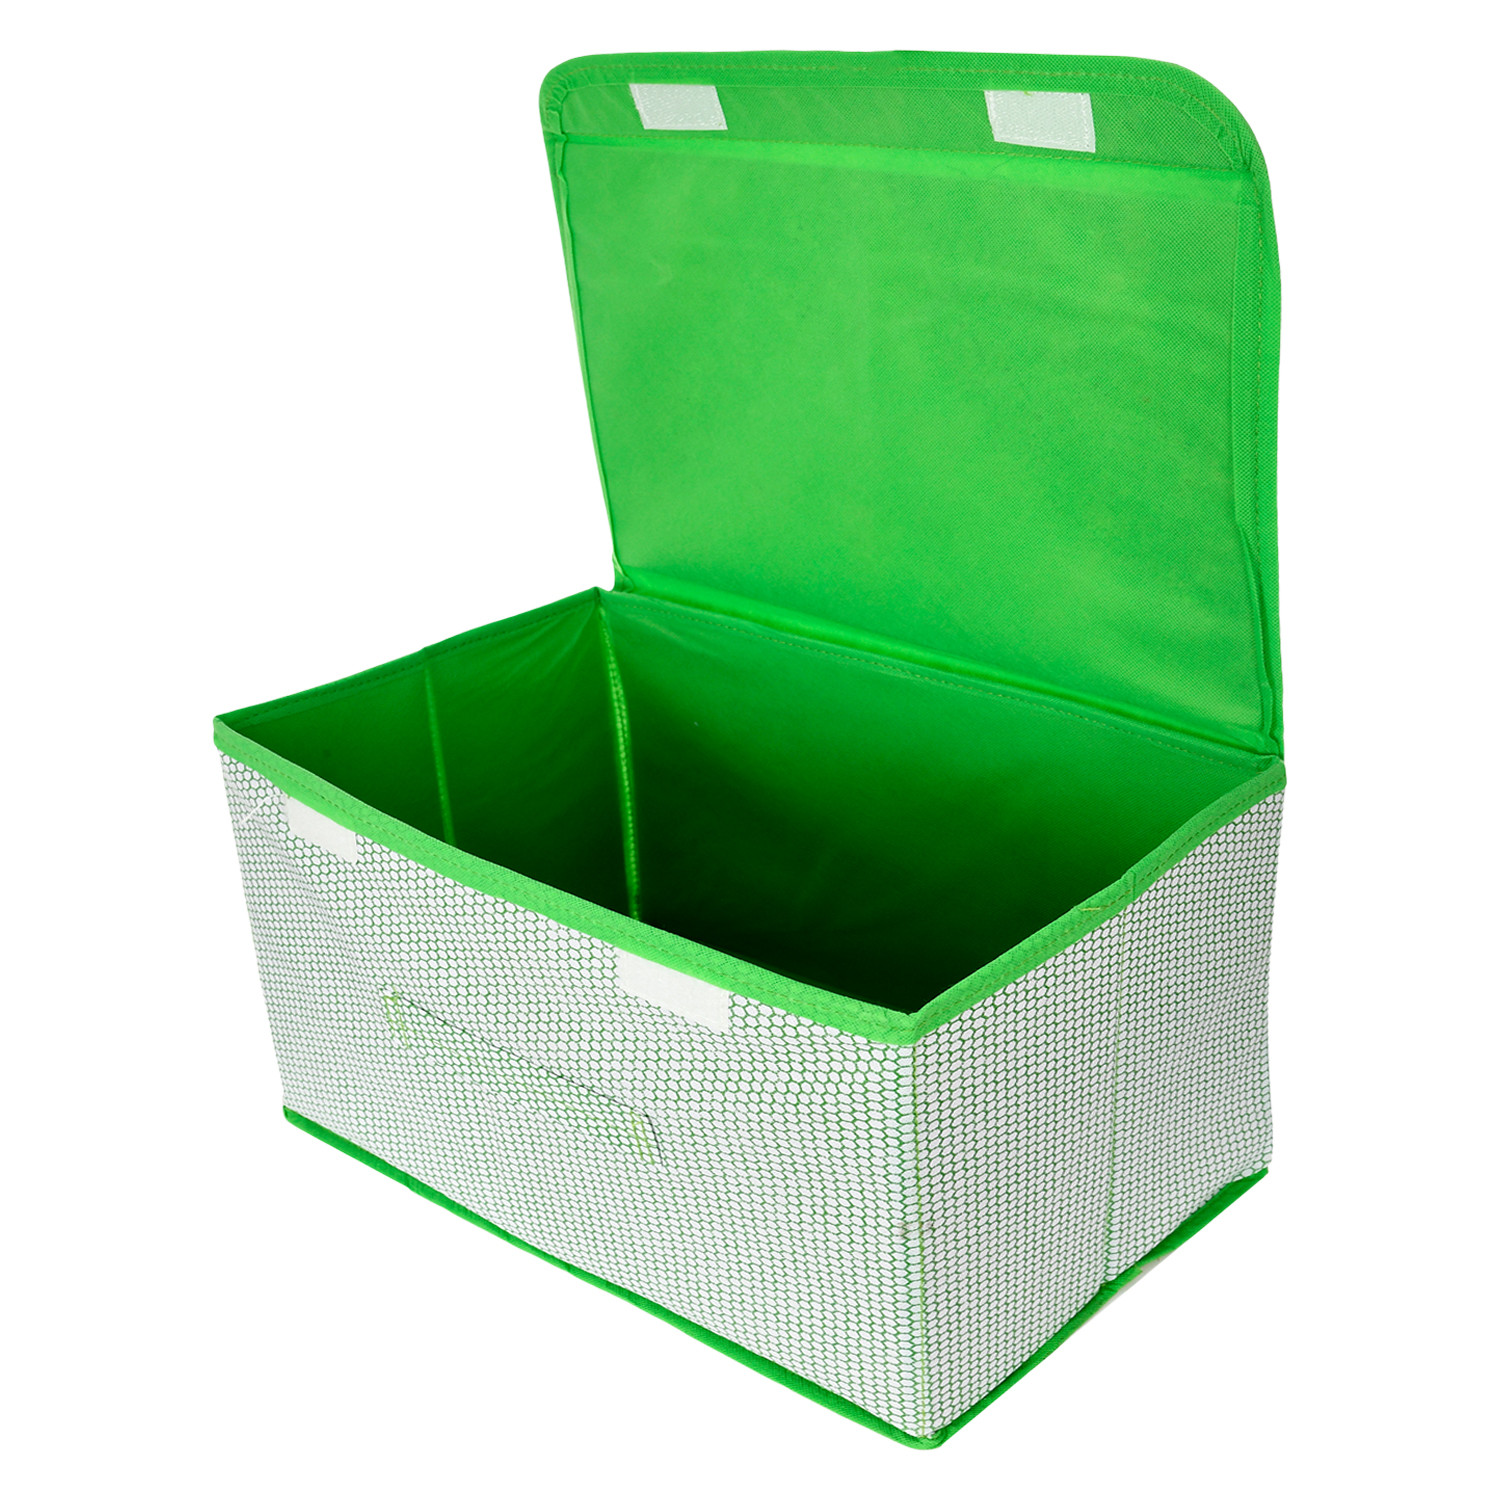 Kuber Industries Drawer Storage Box | Foldable Dhakkan Storage Box | Non-Woven Clothes Organizer For Toys | Storage Box with Handle | Medium | Pack of 3 | Green & Gray